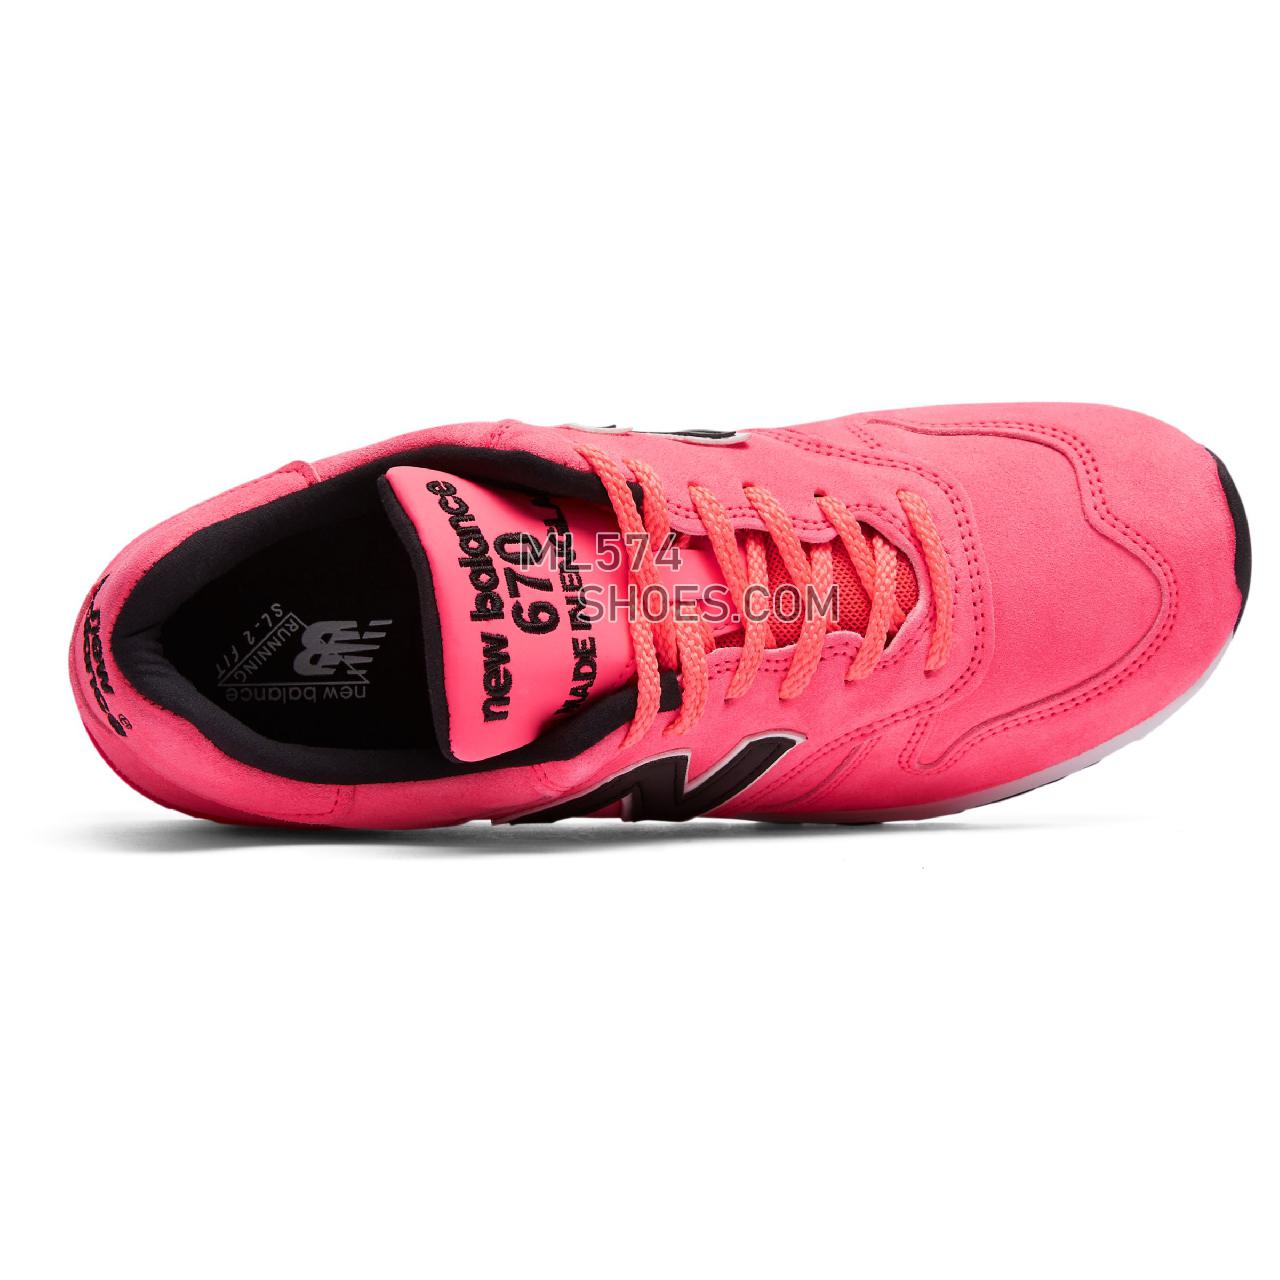 New Balance Made in UK 670 - Men's Made in UK 670 Classic - Pink with Black and White - M670NEN